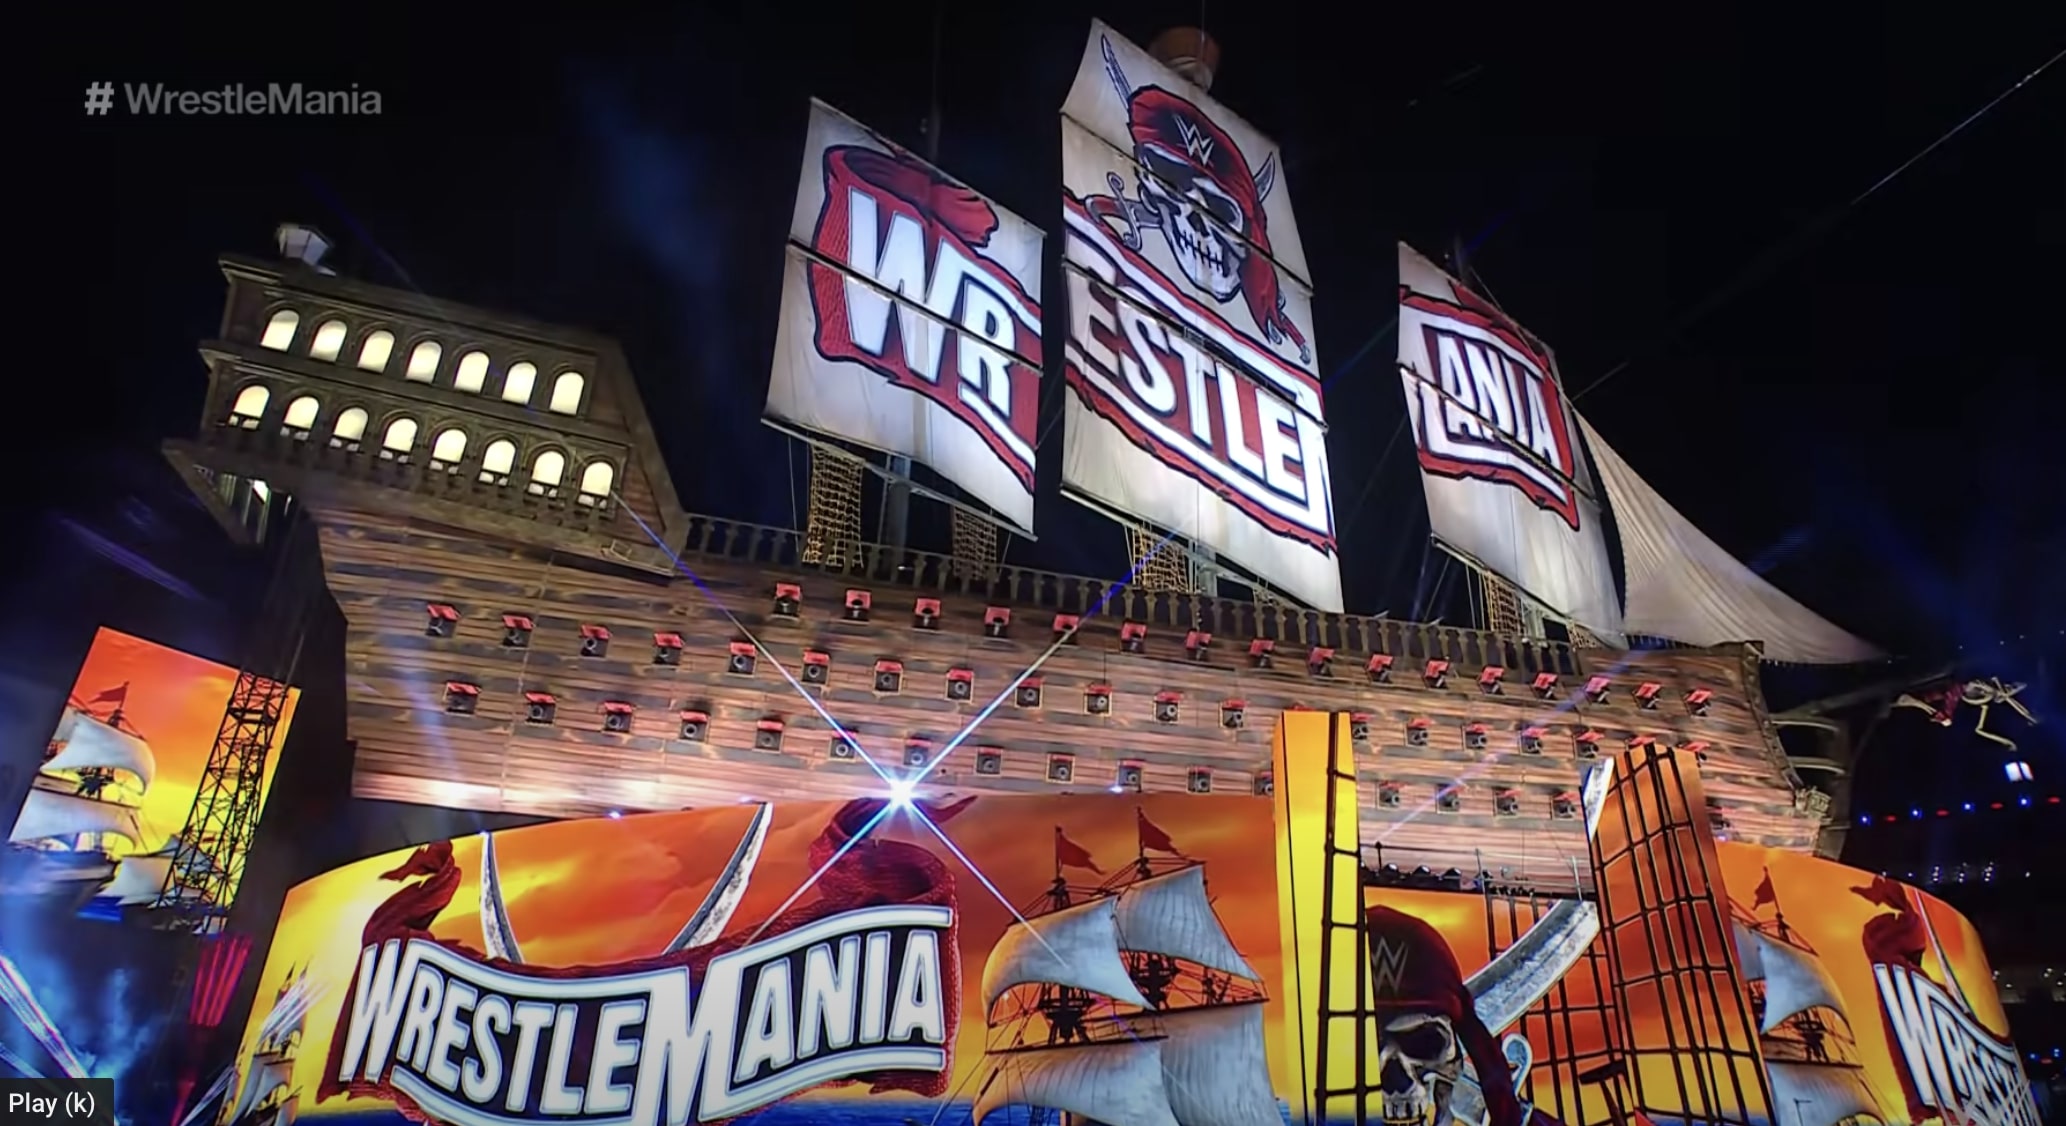 WWE Reveals First Official Look At The WrestleMania 37 Stage